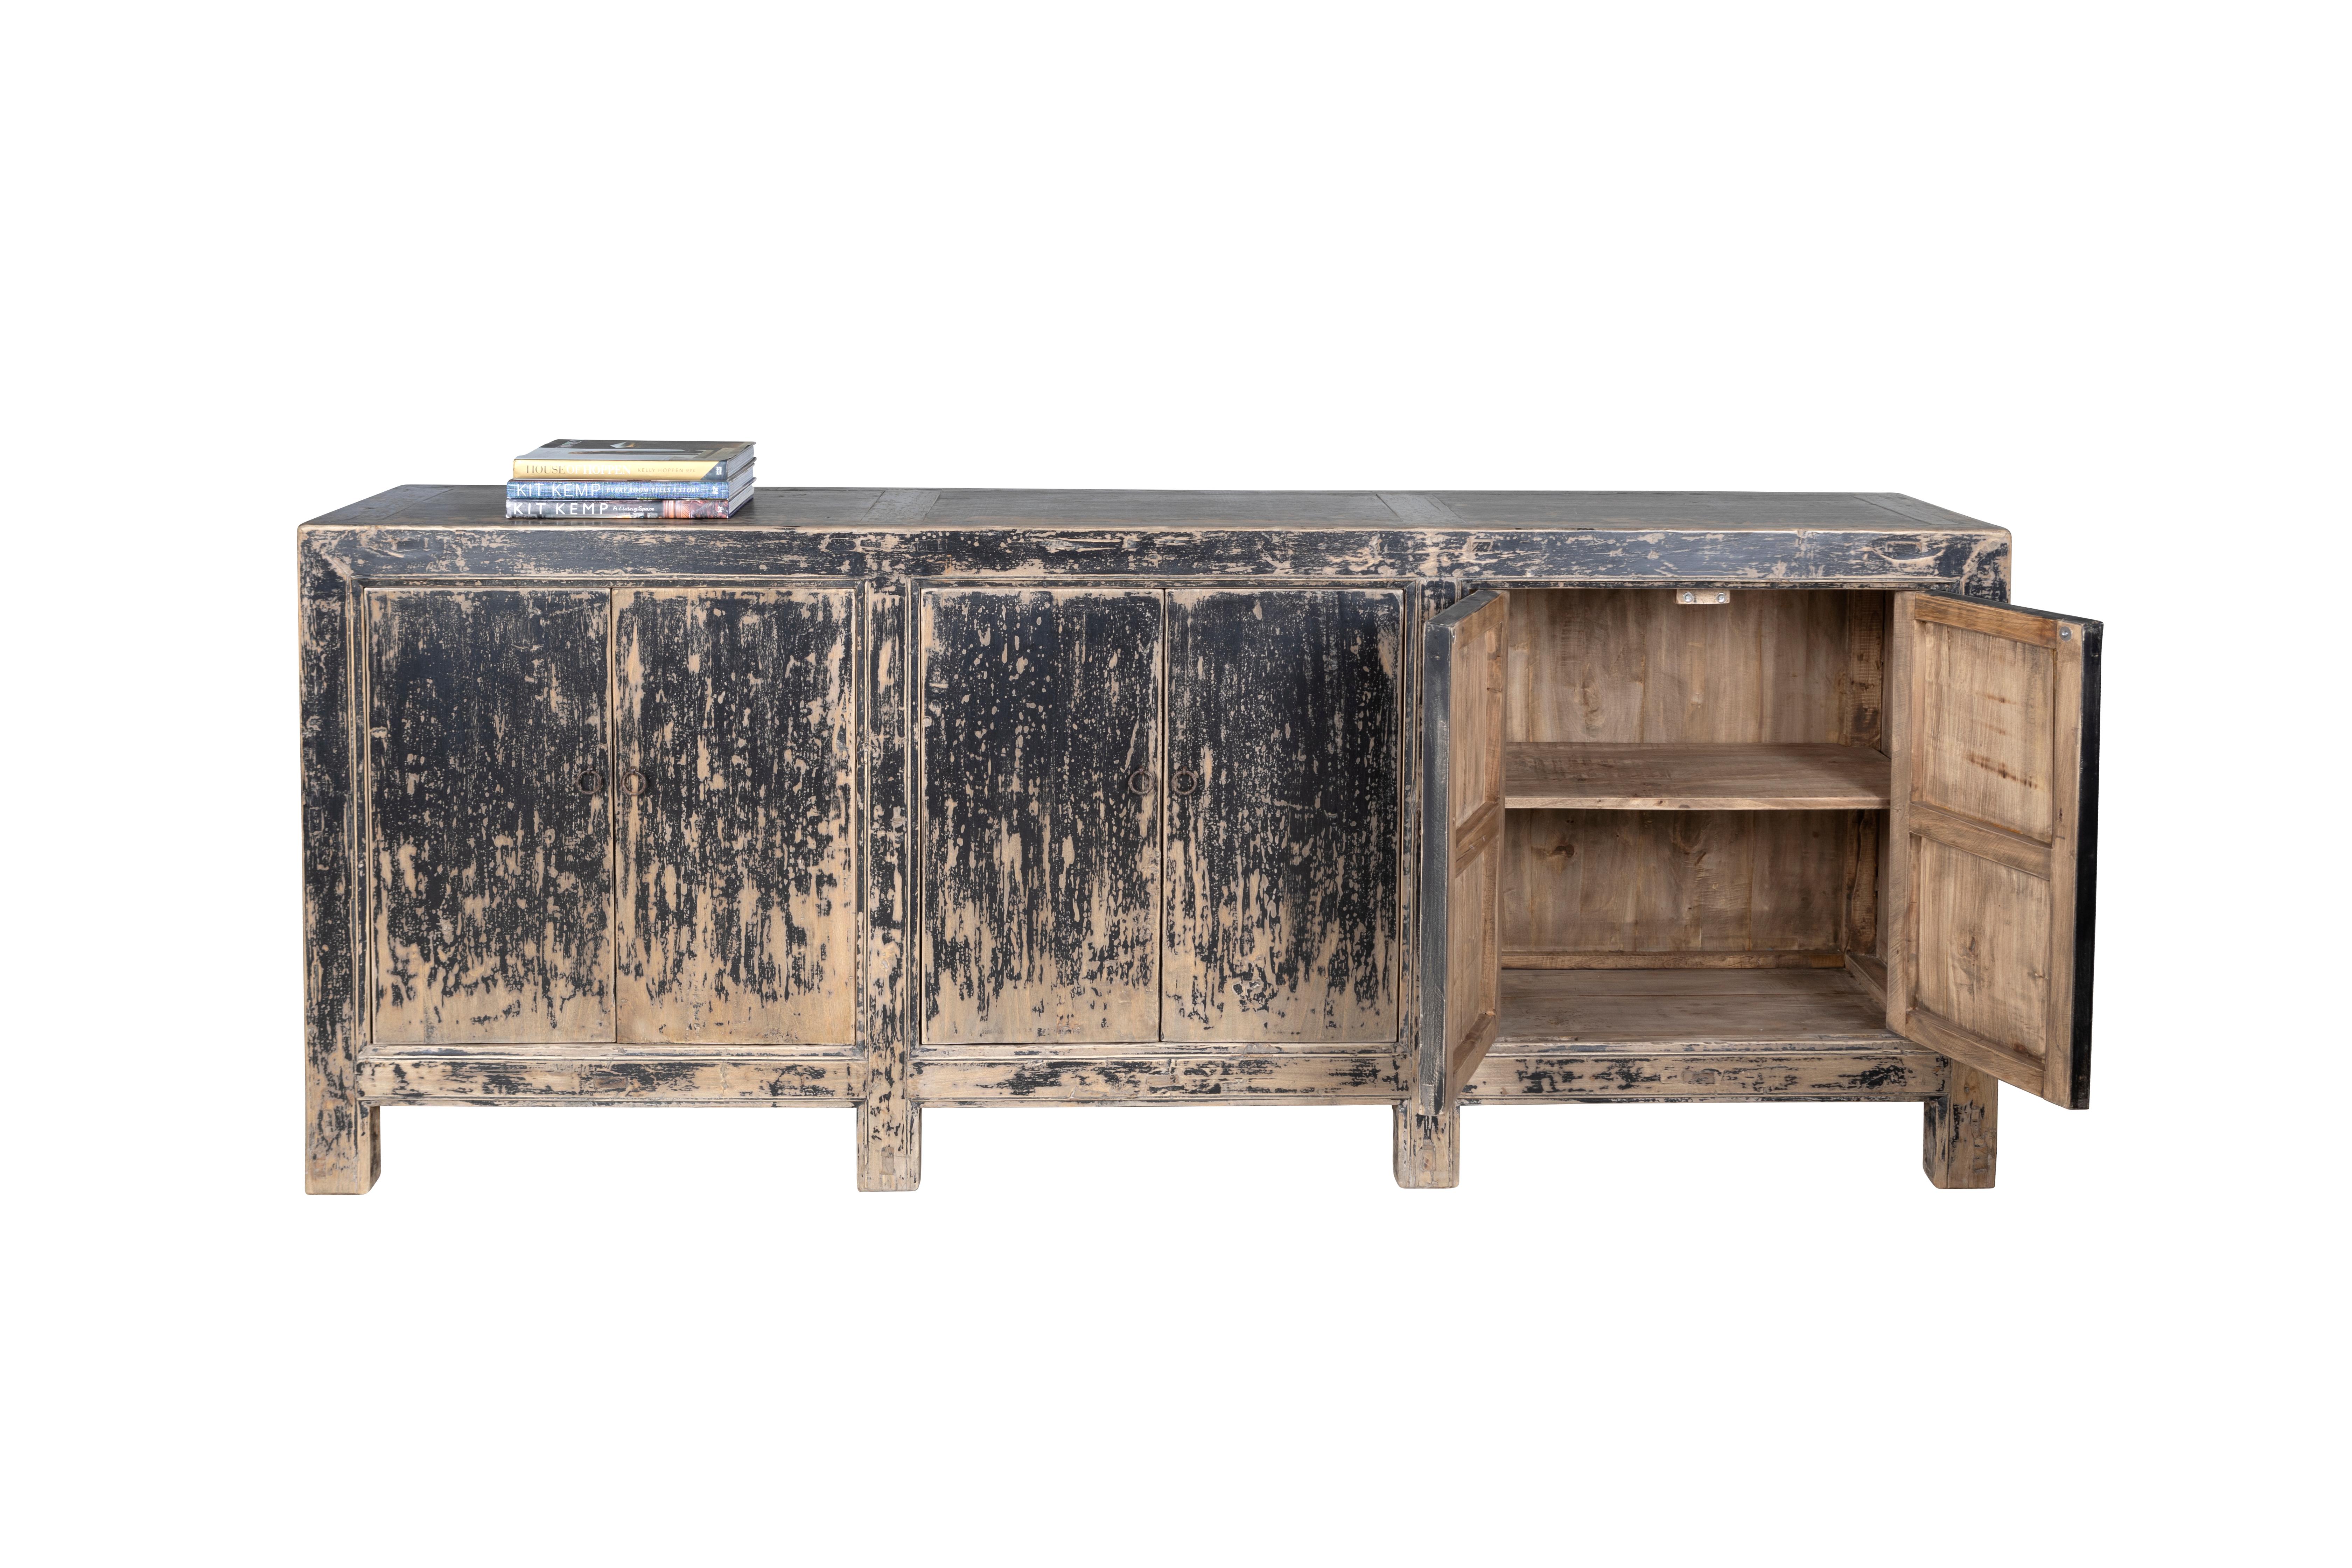 Large six door elm server with original paint patina and metal pulls.

The piece is a part of our one-of-a-kind collection, Le Monde. Exclusive to us.

Globally curated by Brendan Bass, Le Monde furniture and accessories offer modern